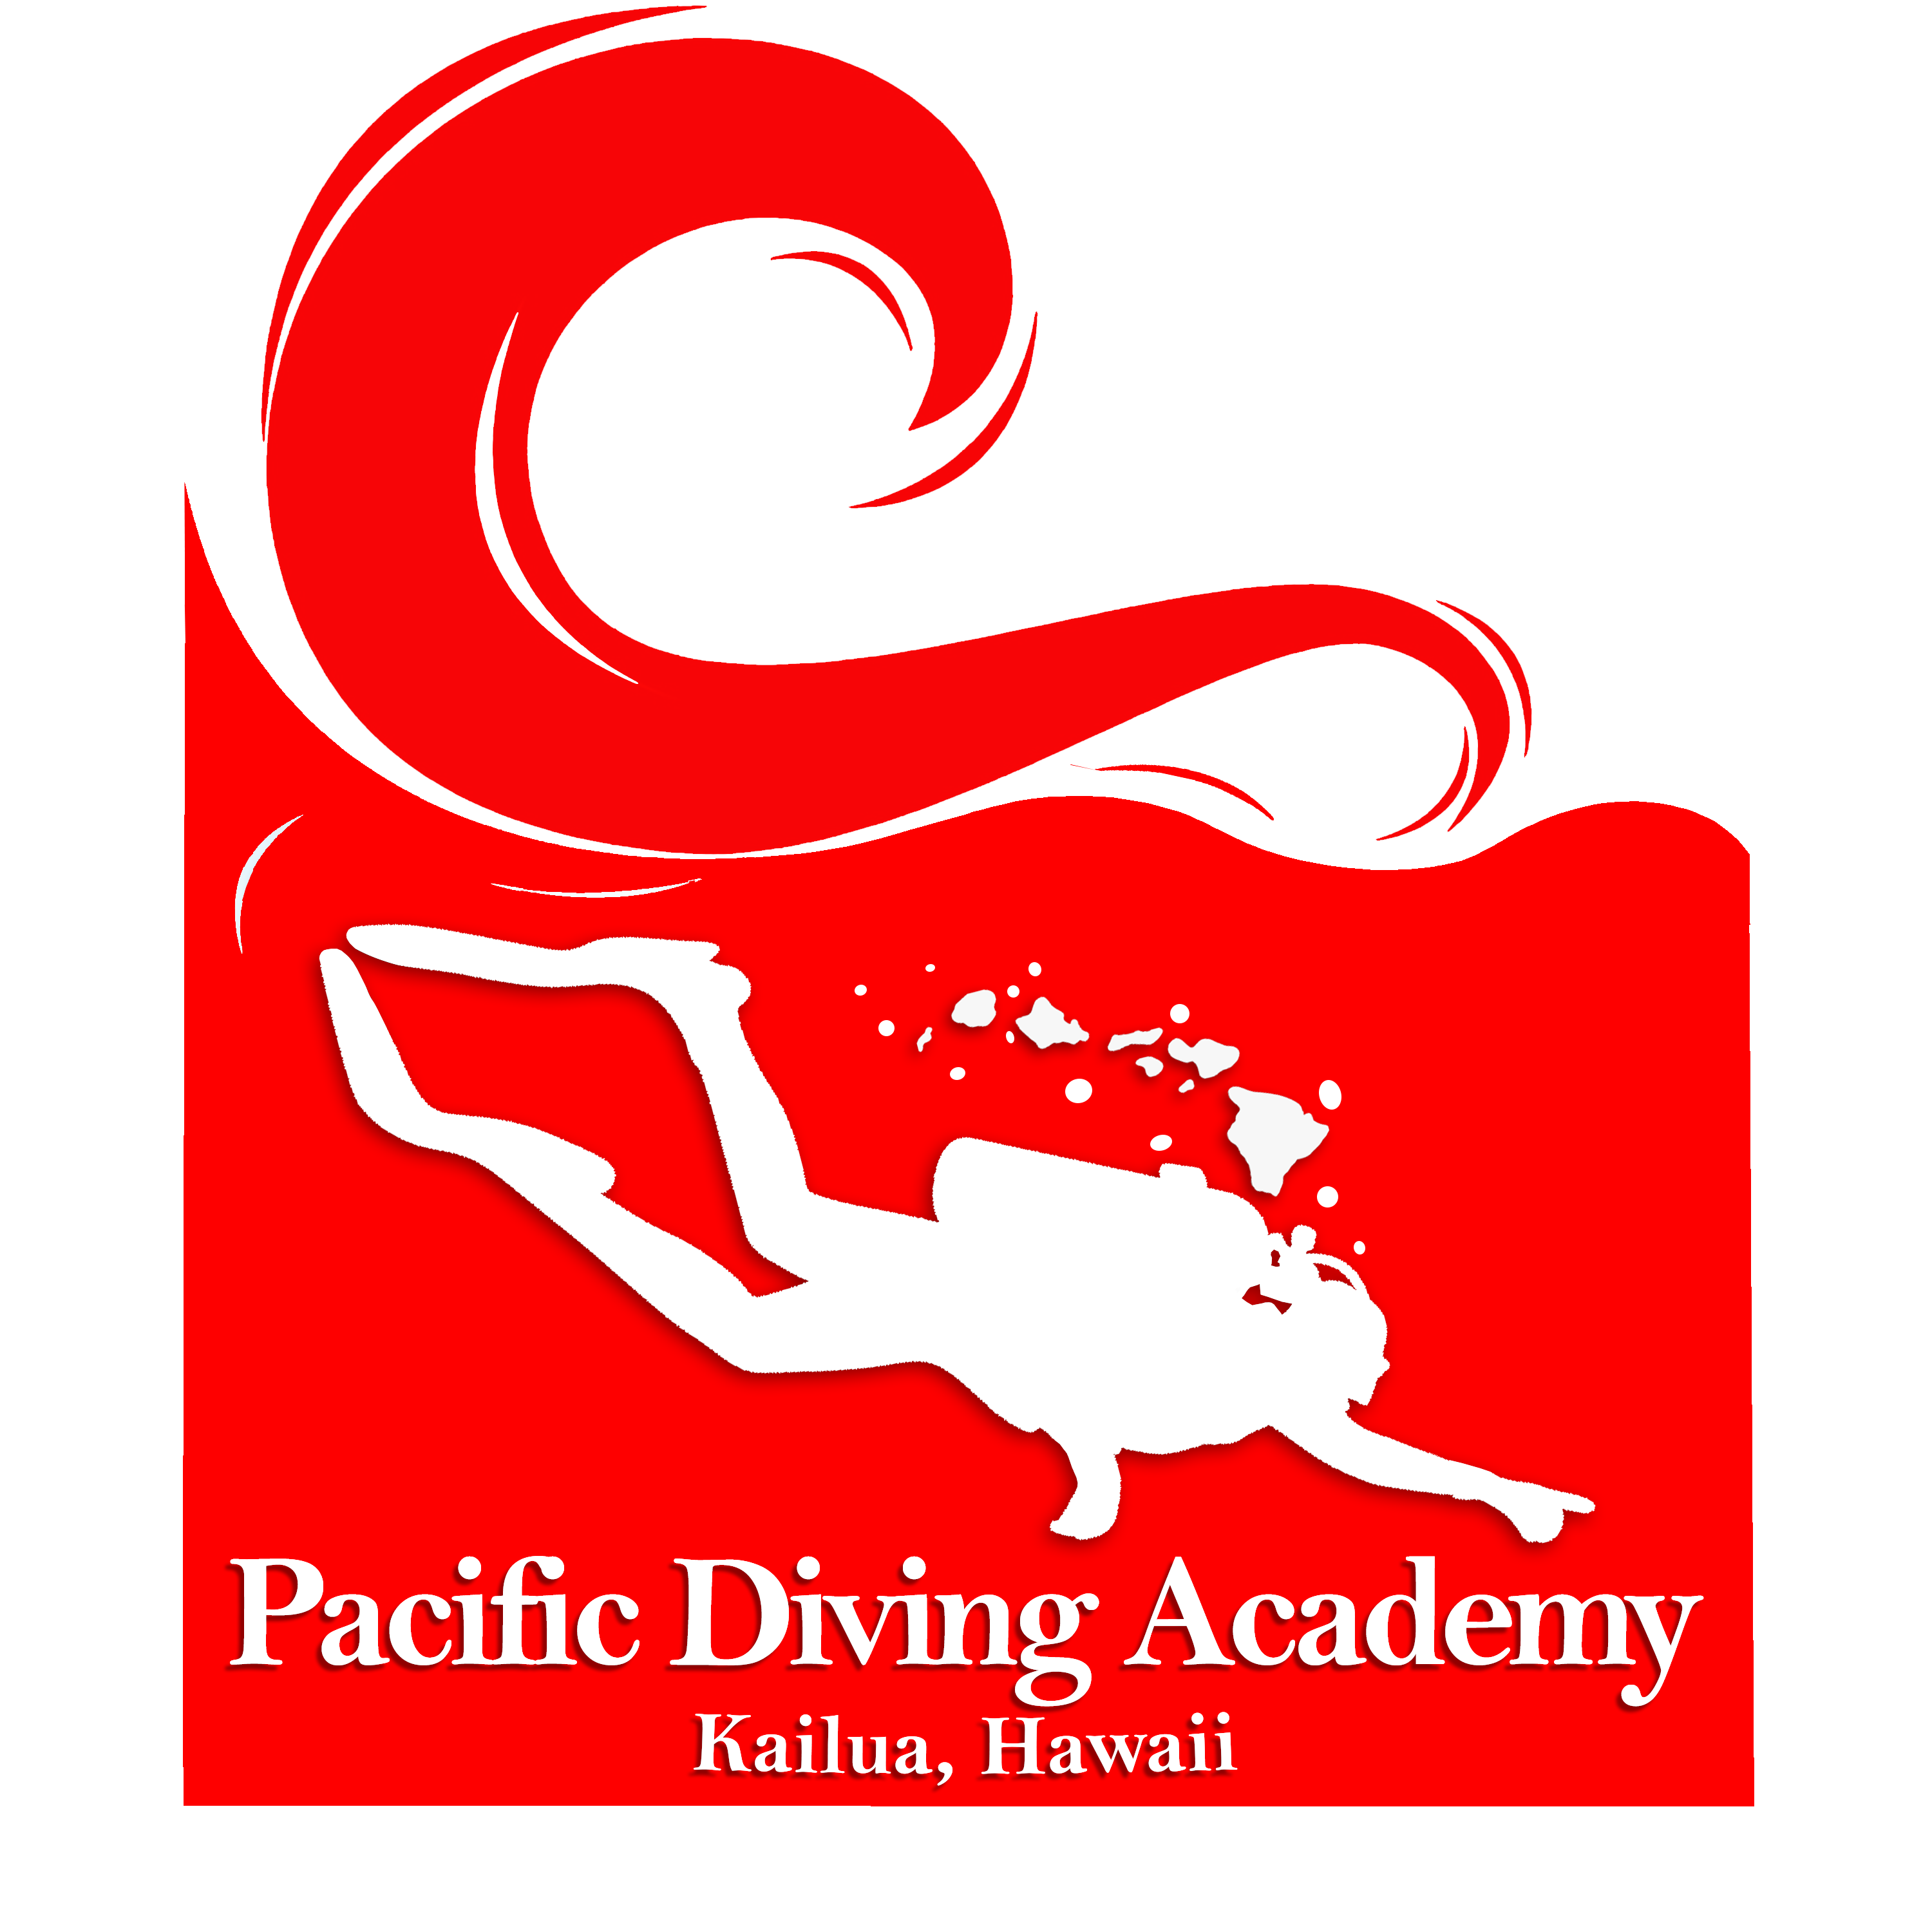 Pacific Diving Academy, Oahu's leading Professional Scuba Diving Training Center